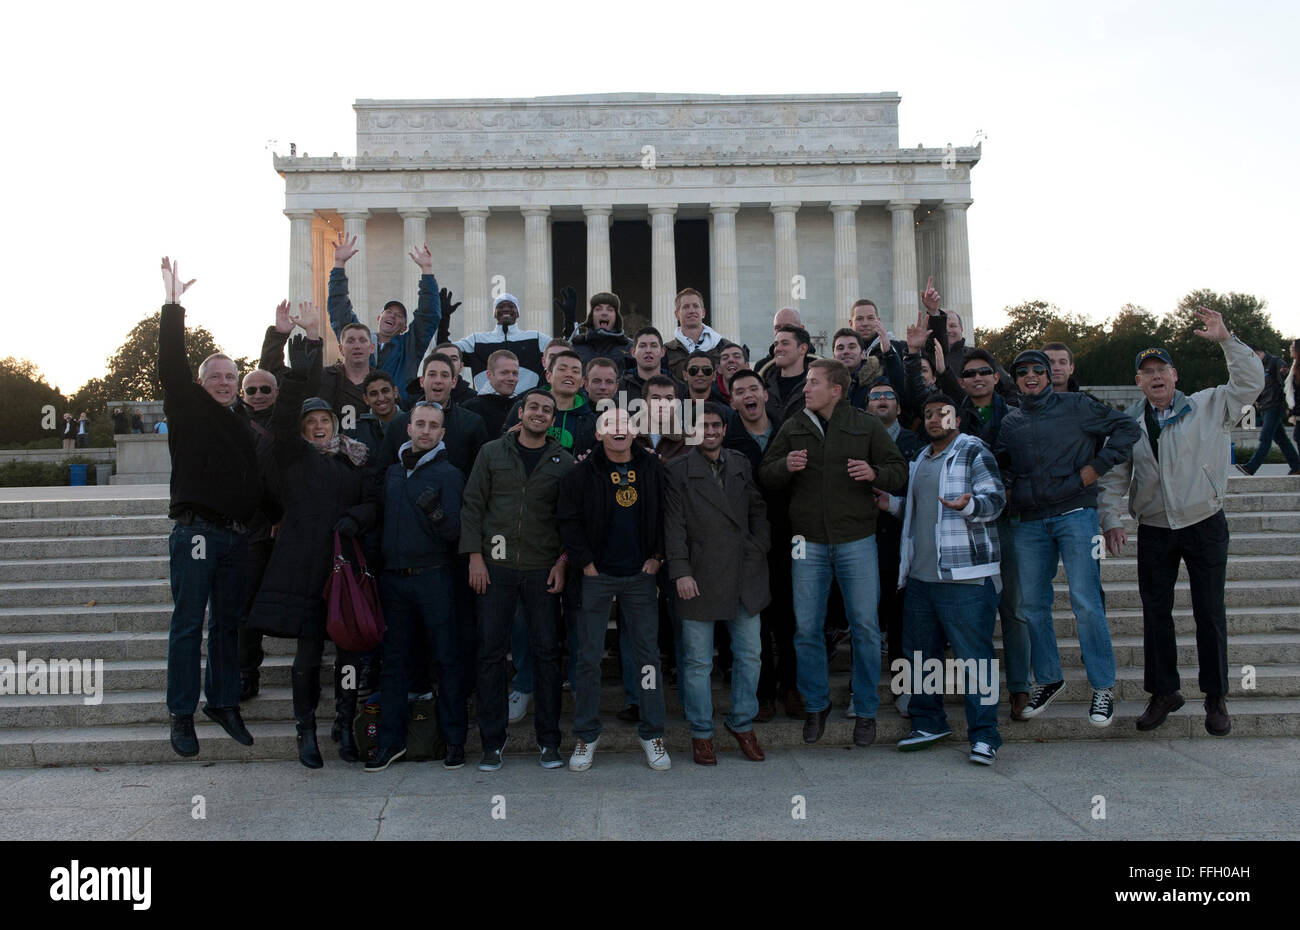 U.S. Airmen, multinational students and civilian escorts pose for a group photo in front of the Lincoln Memorial during their tour of Washington, D.C. Stock Photo